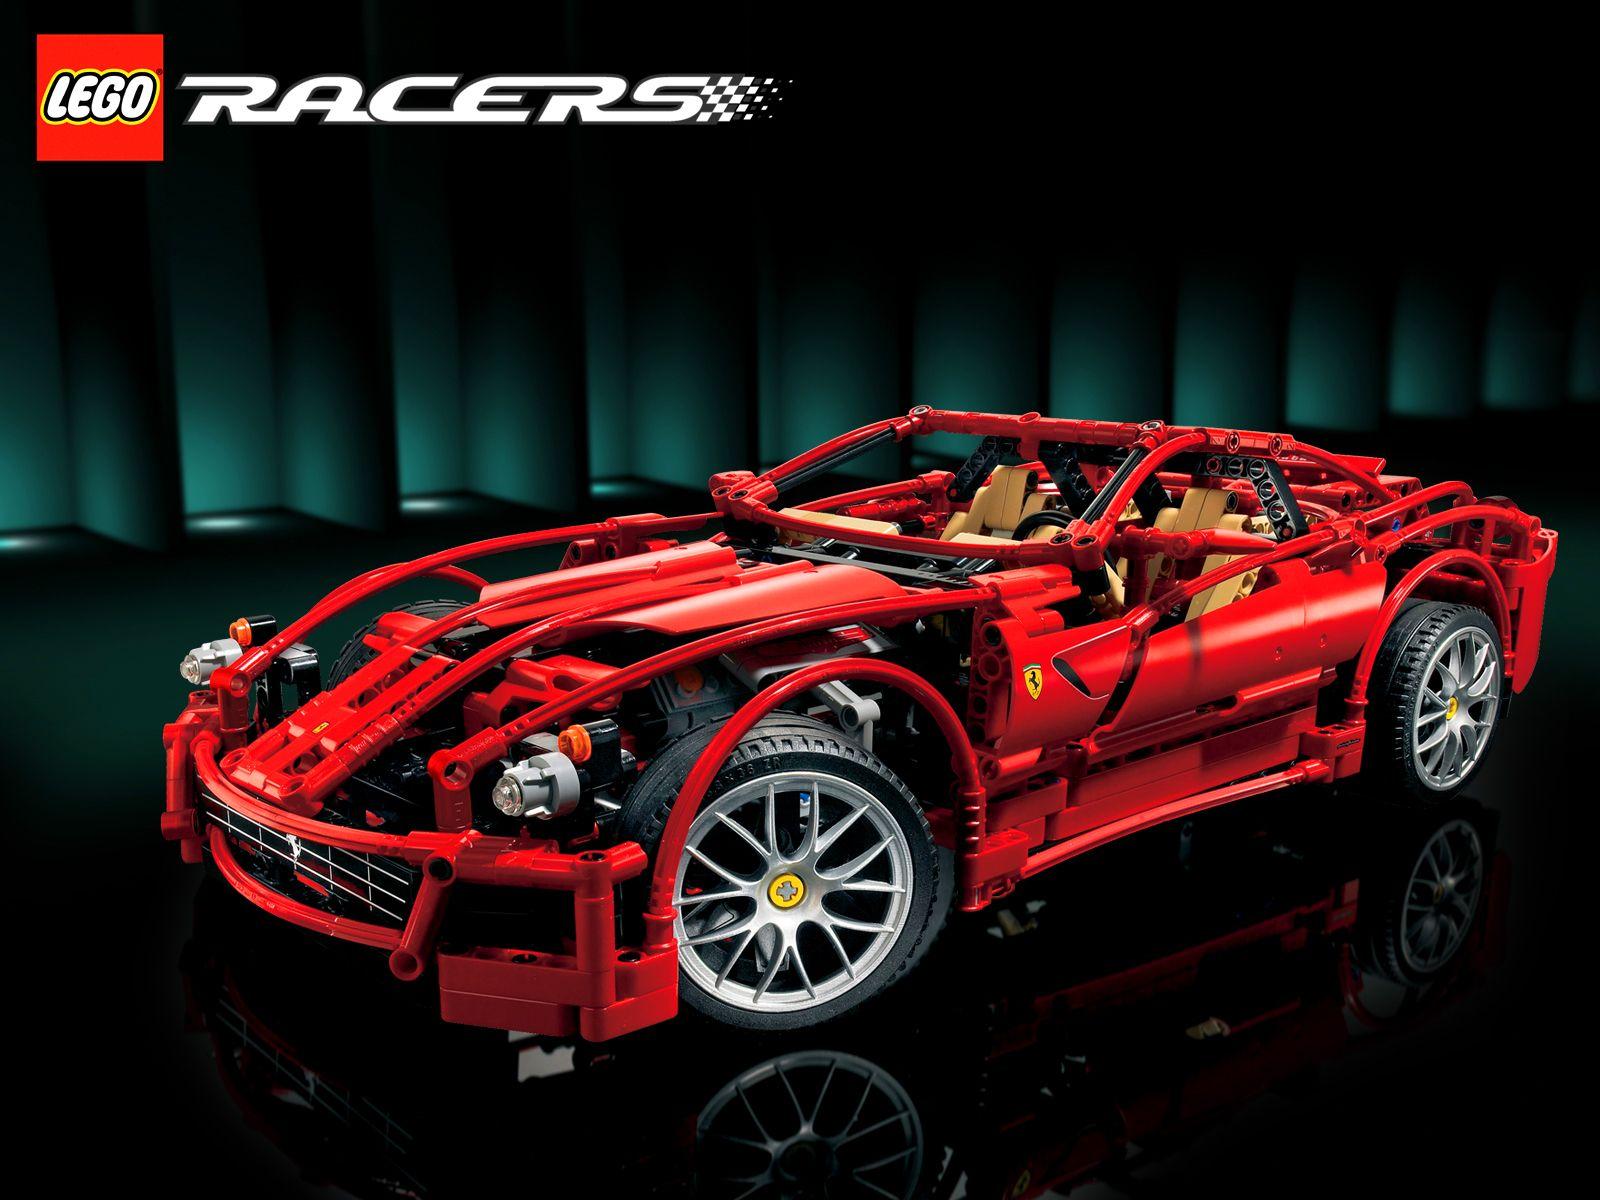 Lego Racers. Free Desktop Wallpaper for Widescreen, HD and Mobile